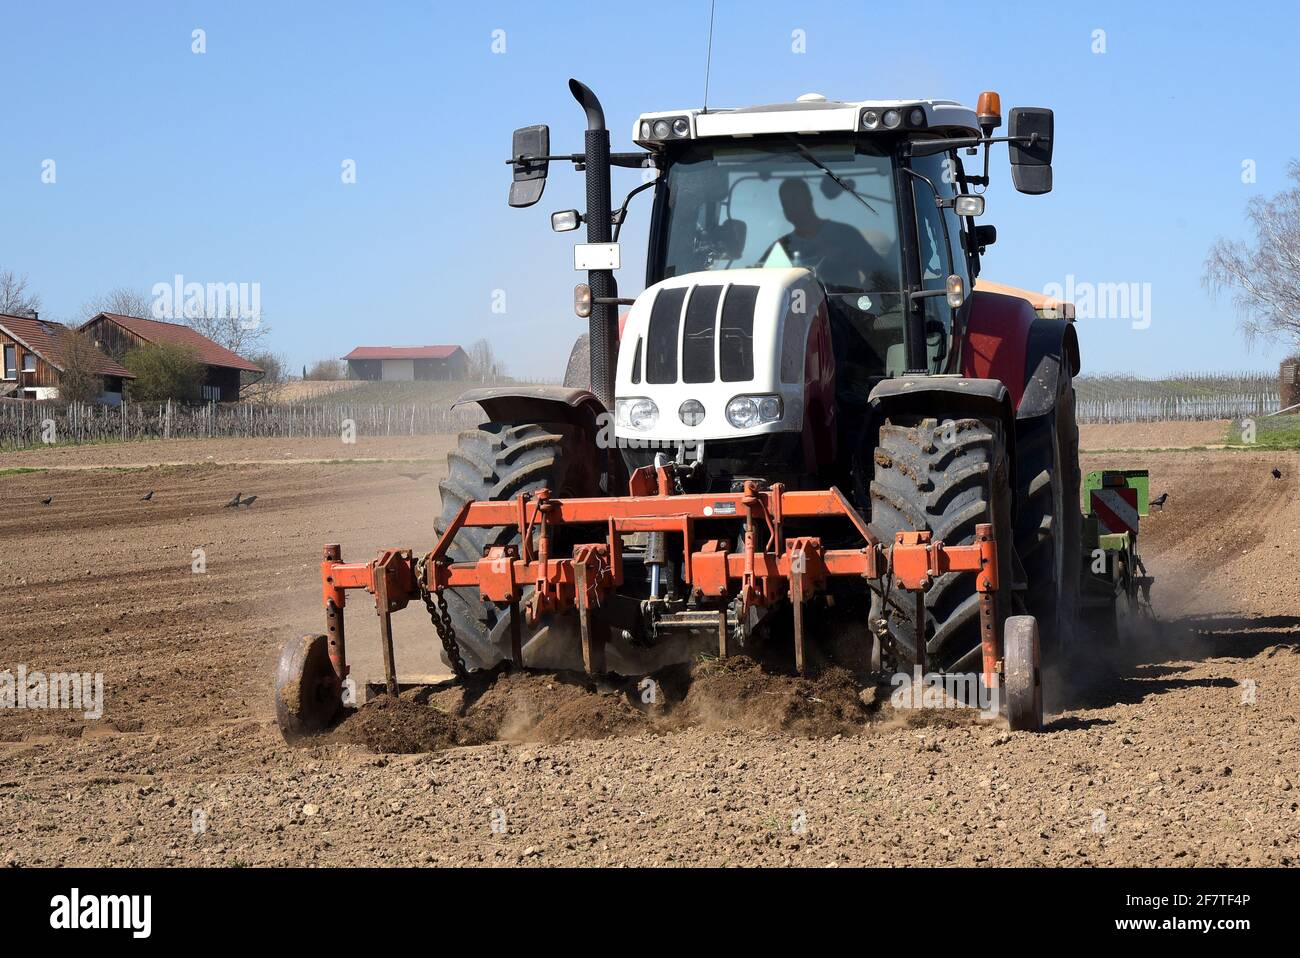 Tractor Ploughing And Sowing Seeds Onto An Agricultural Field On A Sunny Day At The Start Of The